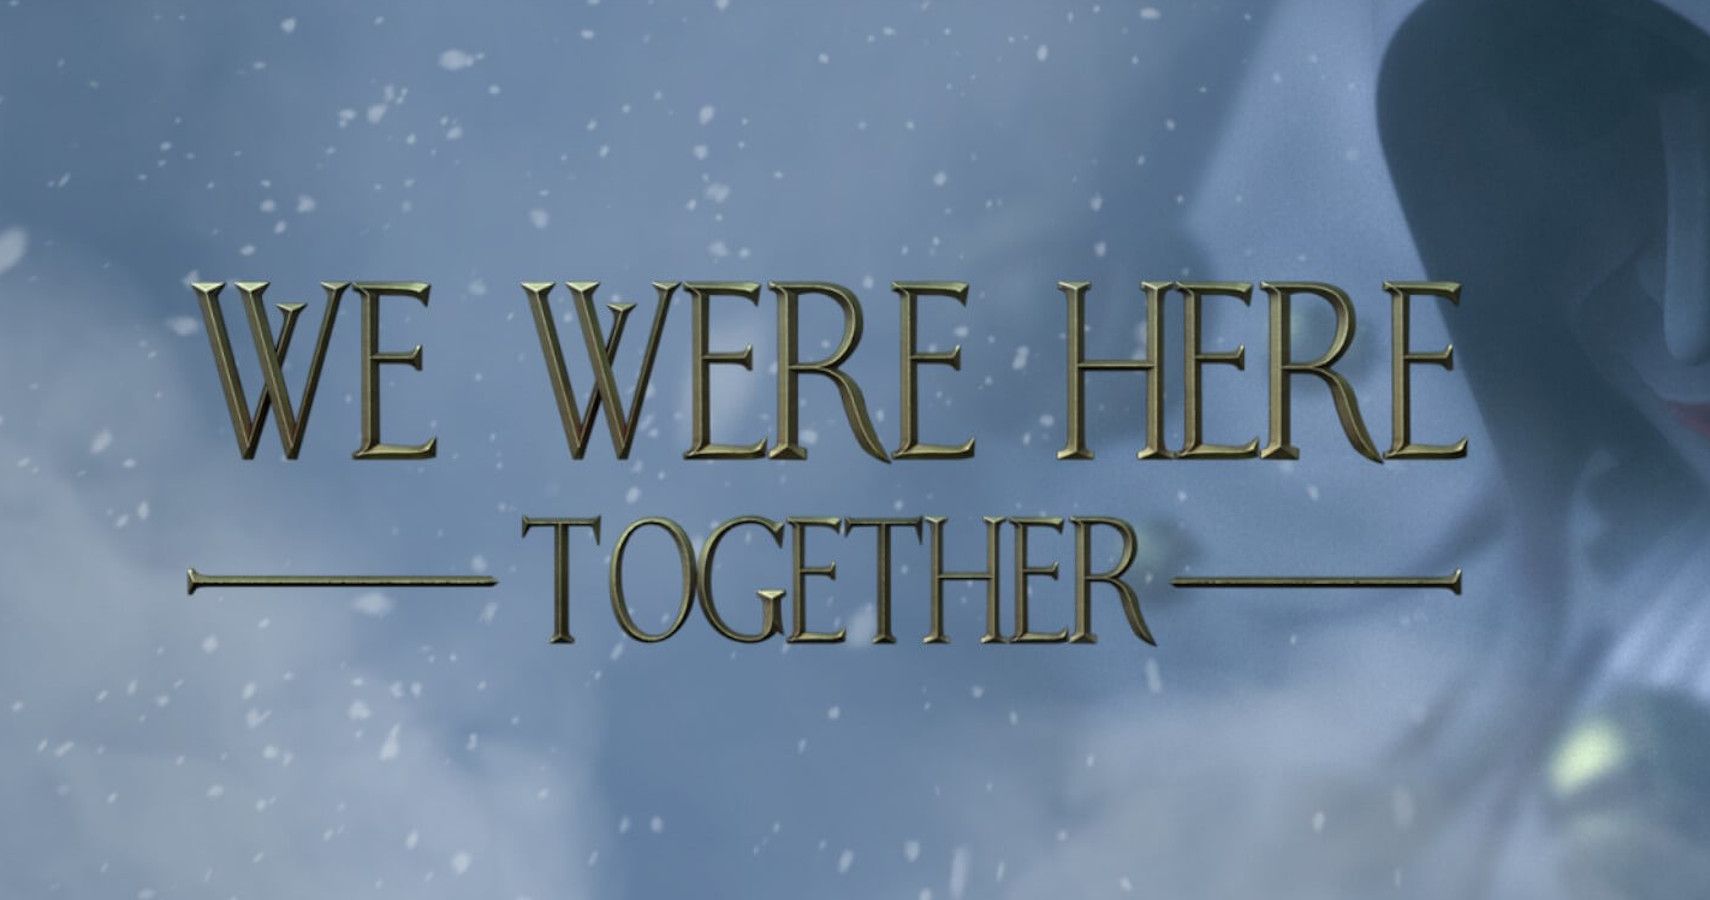 we were here together star puzzle